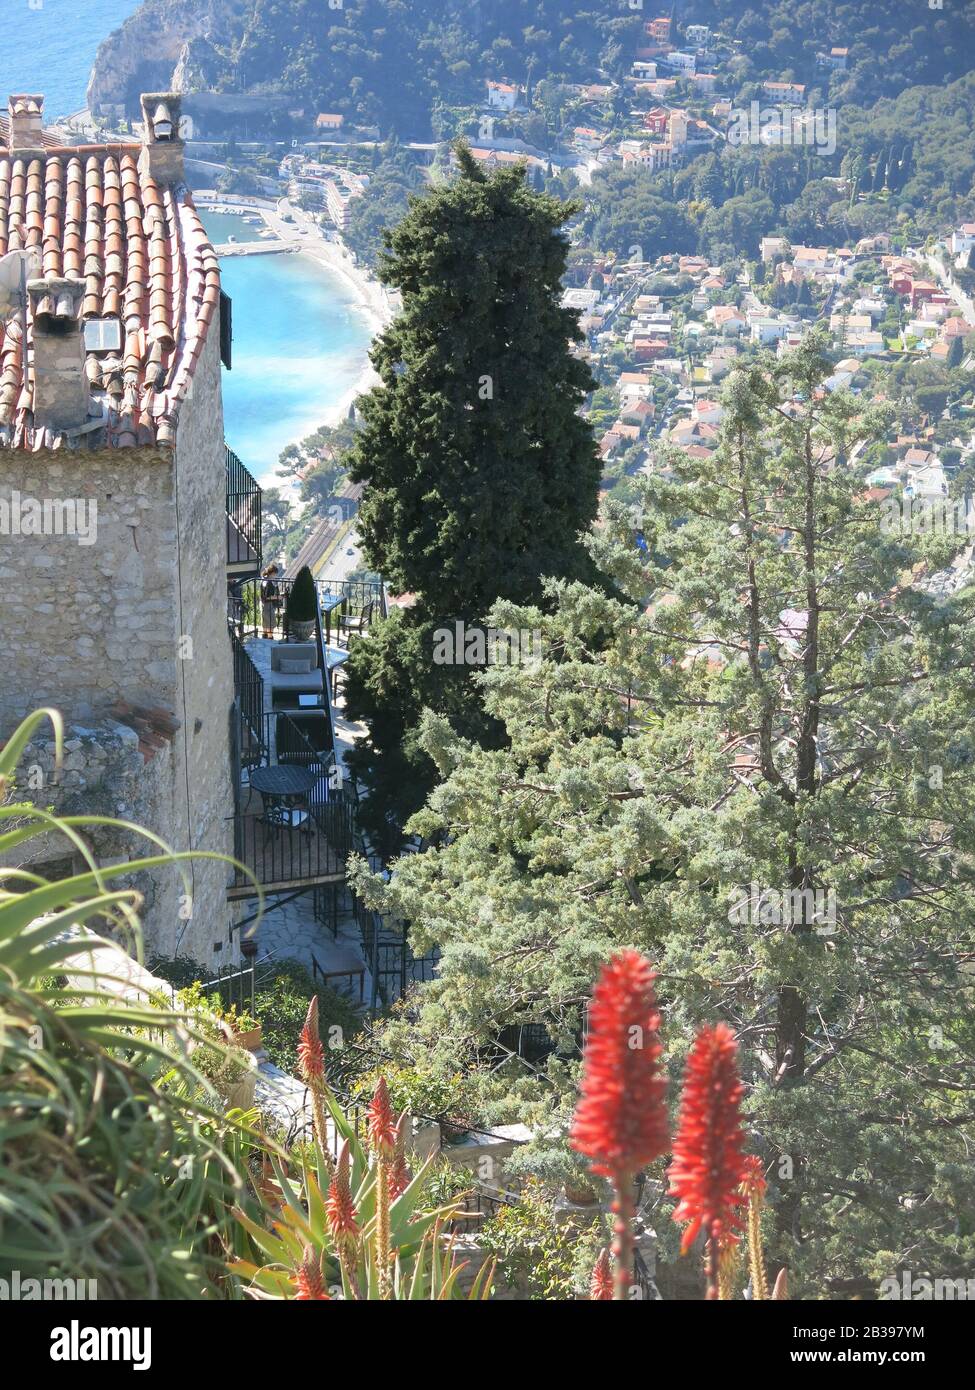 Sited on a medieval fortress, the exotic gardens of Eze on the French Riviera are full of cacti & afford magnificent views over the Mediterranean. Stock Photo